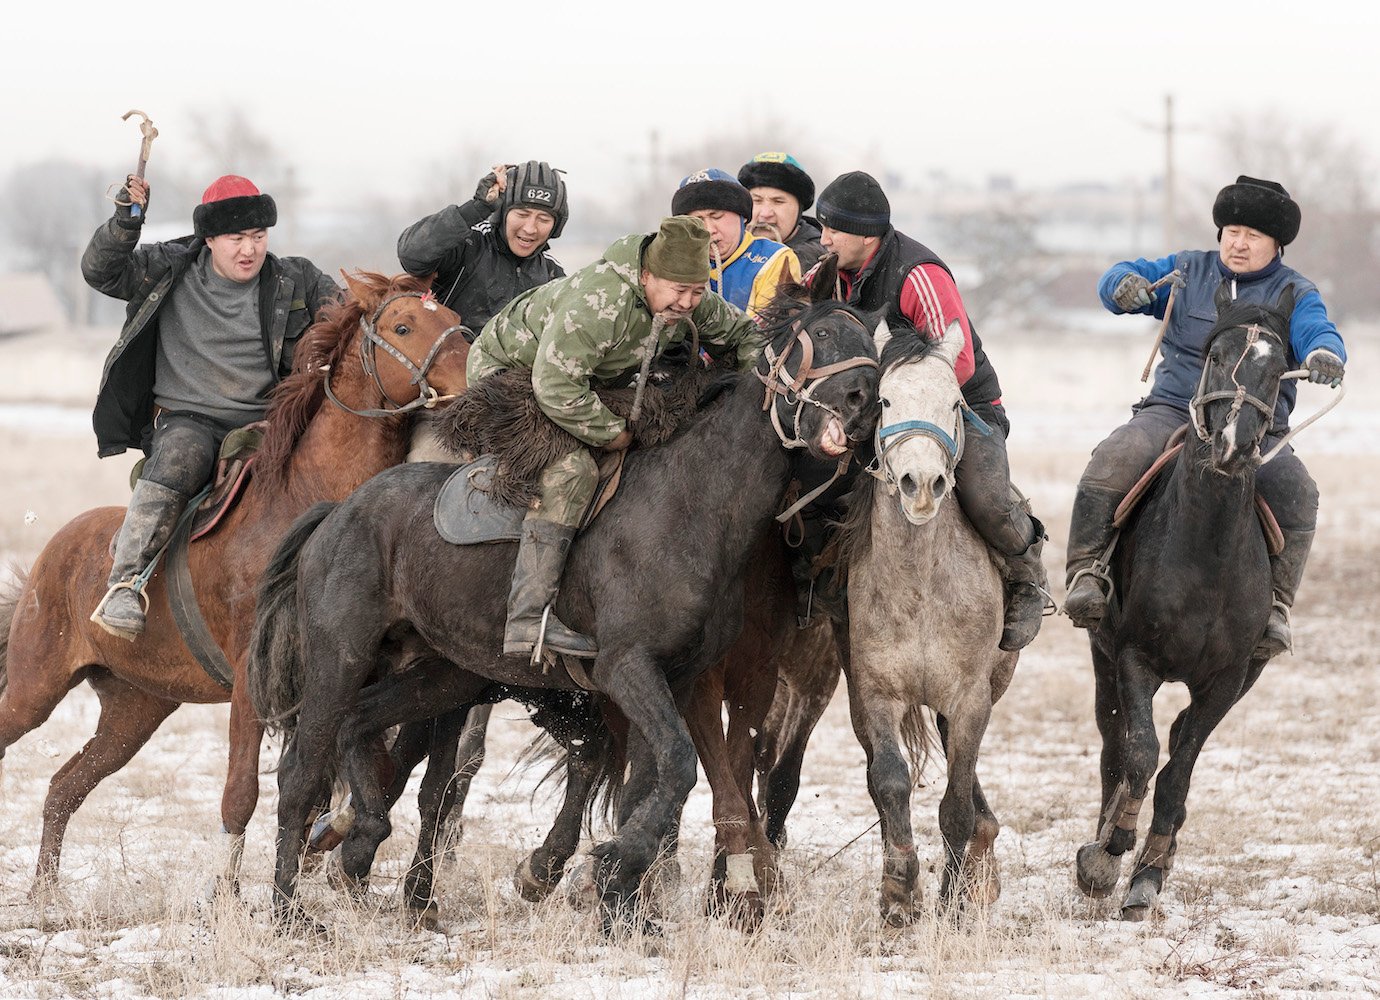  Watch online: the Kyrgyz drama taking on anti-mining protests that’s been banned from cinemas 